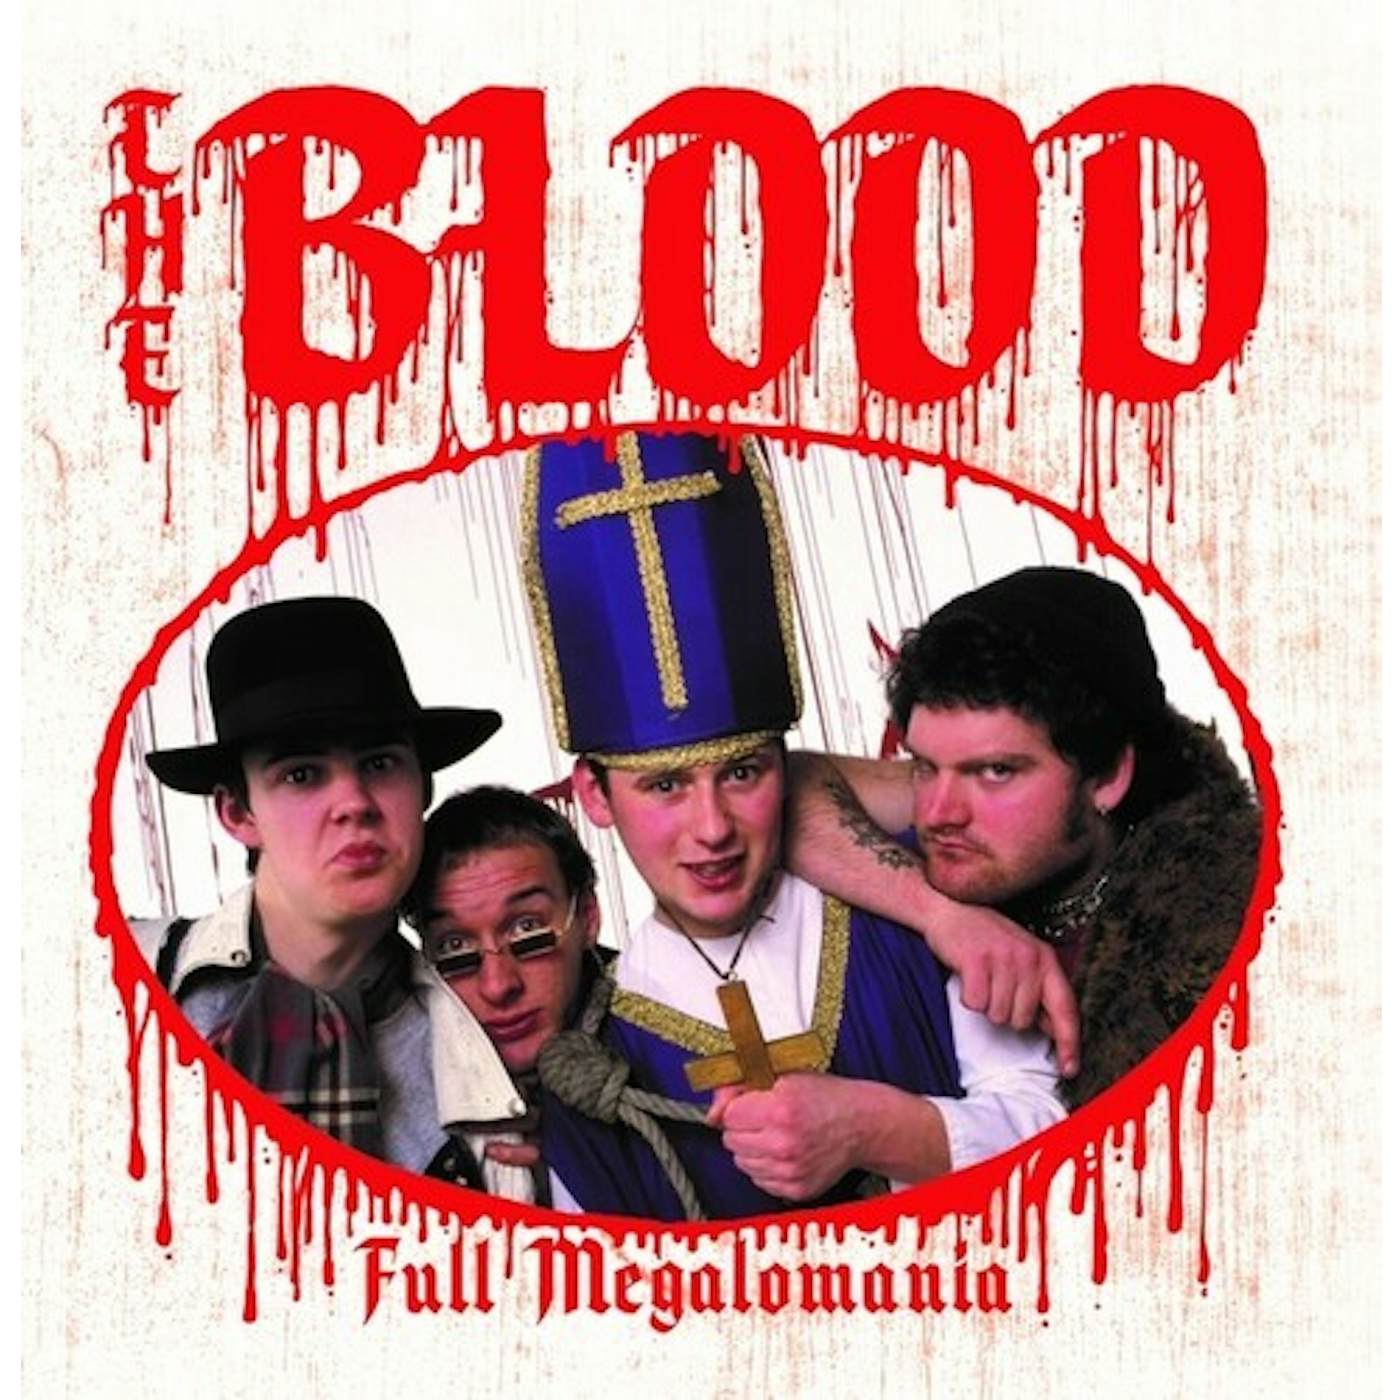 BLOOD TOTAL MEGALOMANIA CD